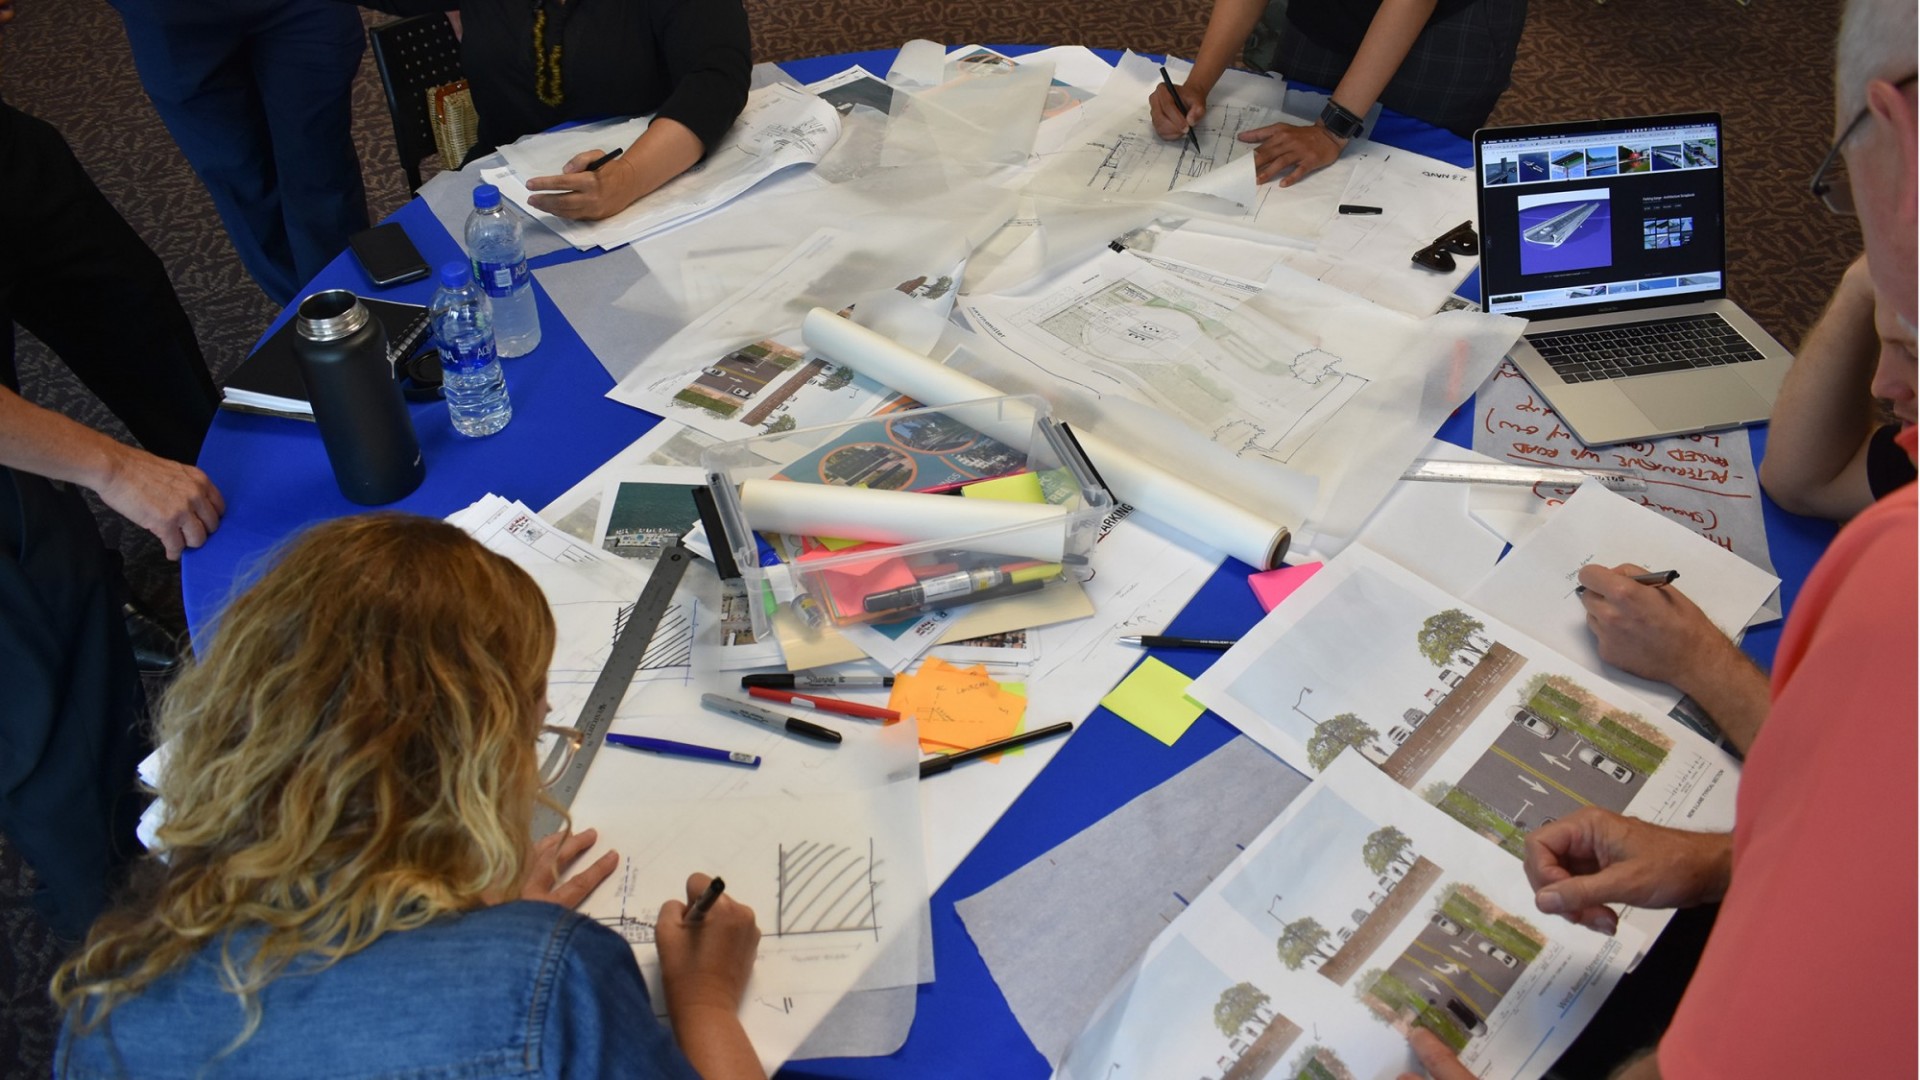 Working image from Southeast Florida Resilience Accelerator workshop displaying participants sketching design ideas and strategies